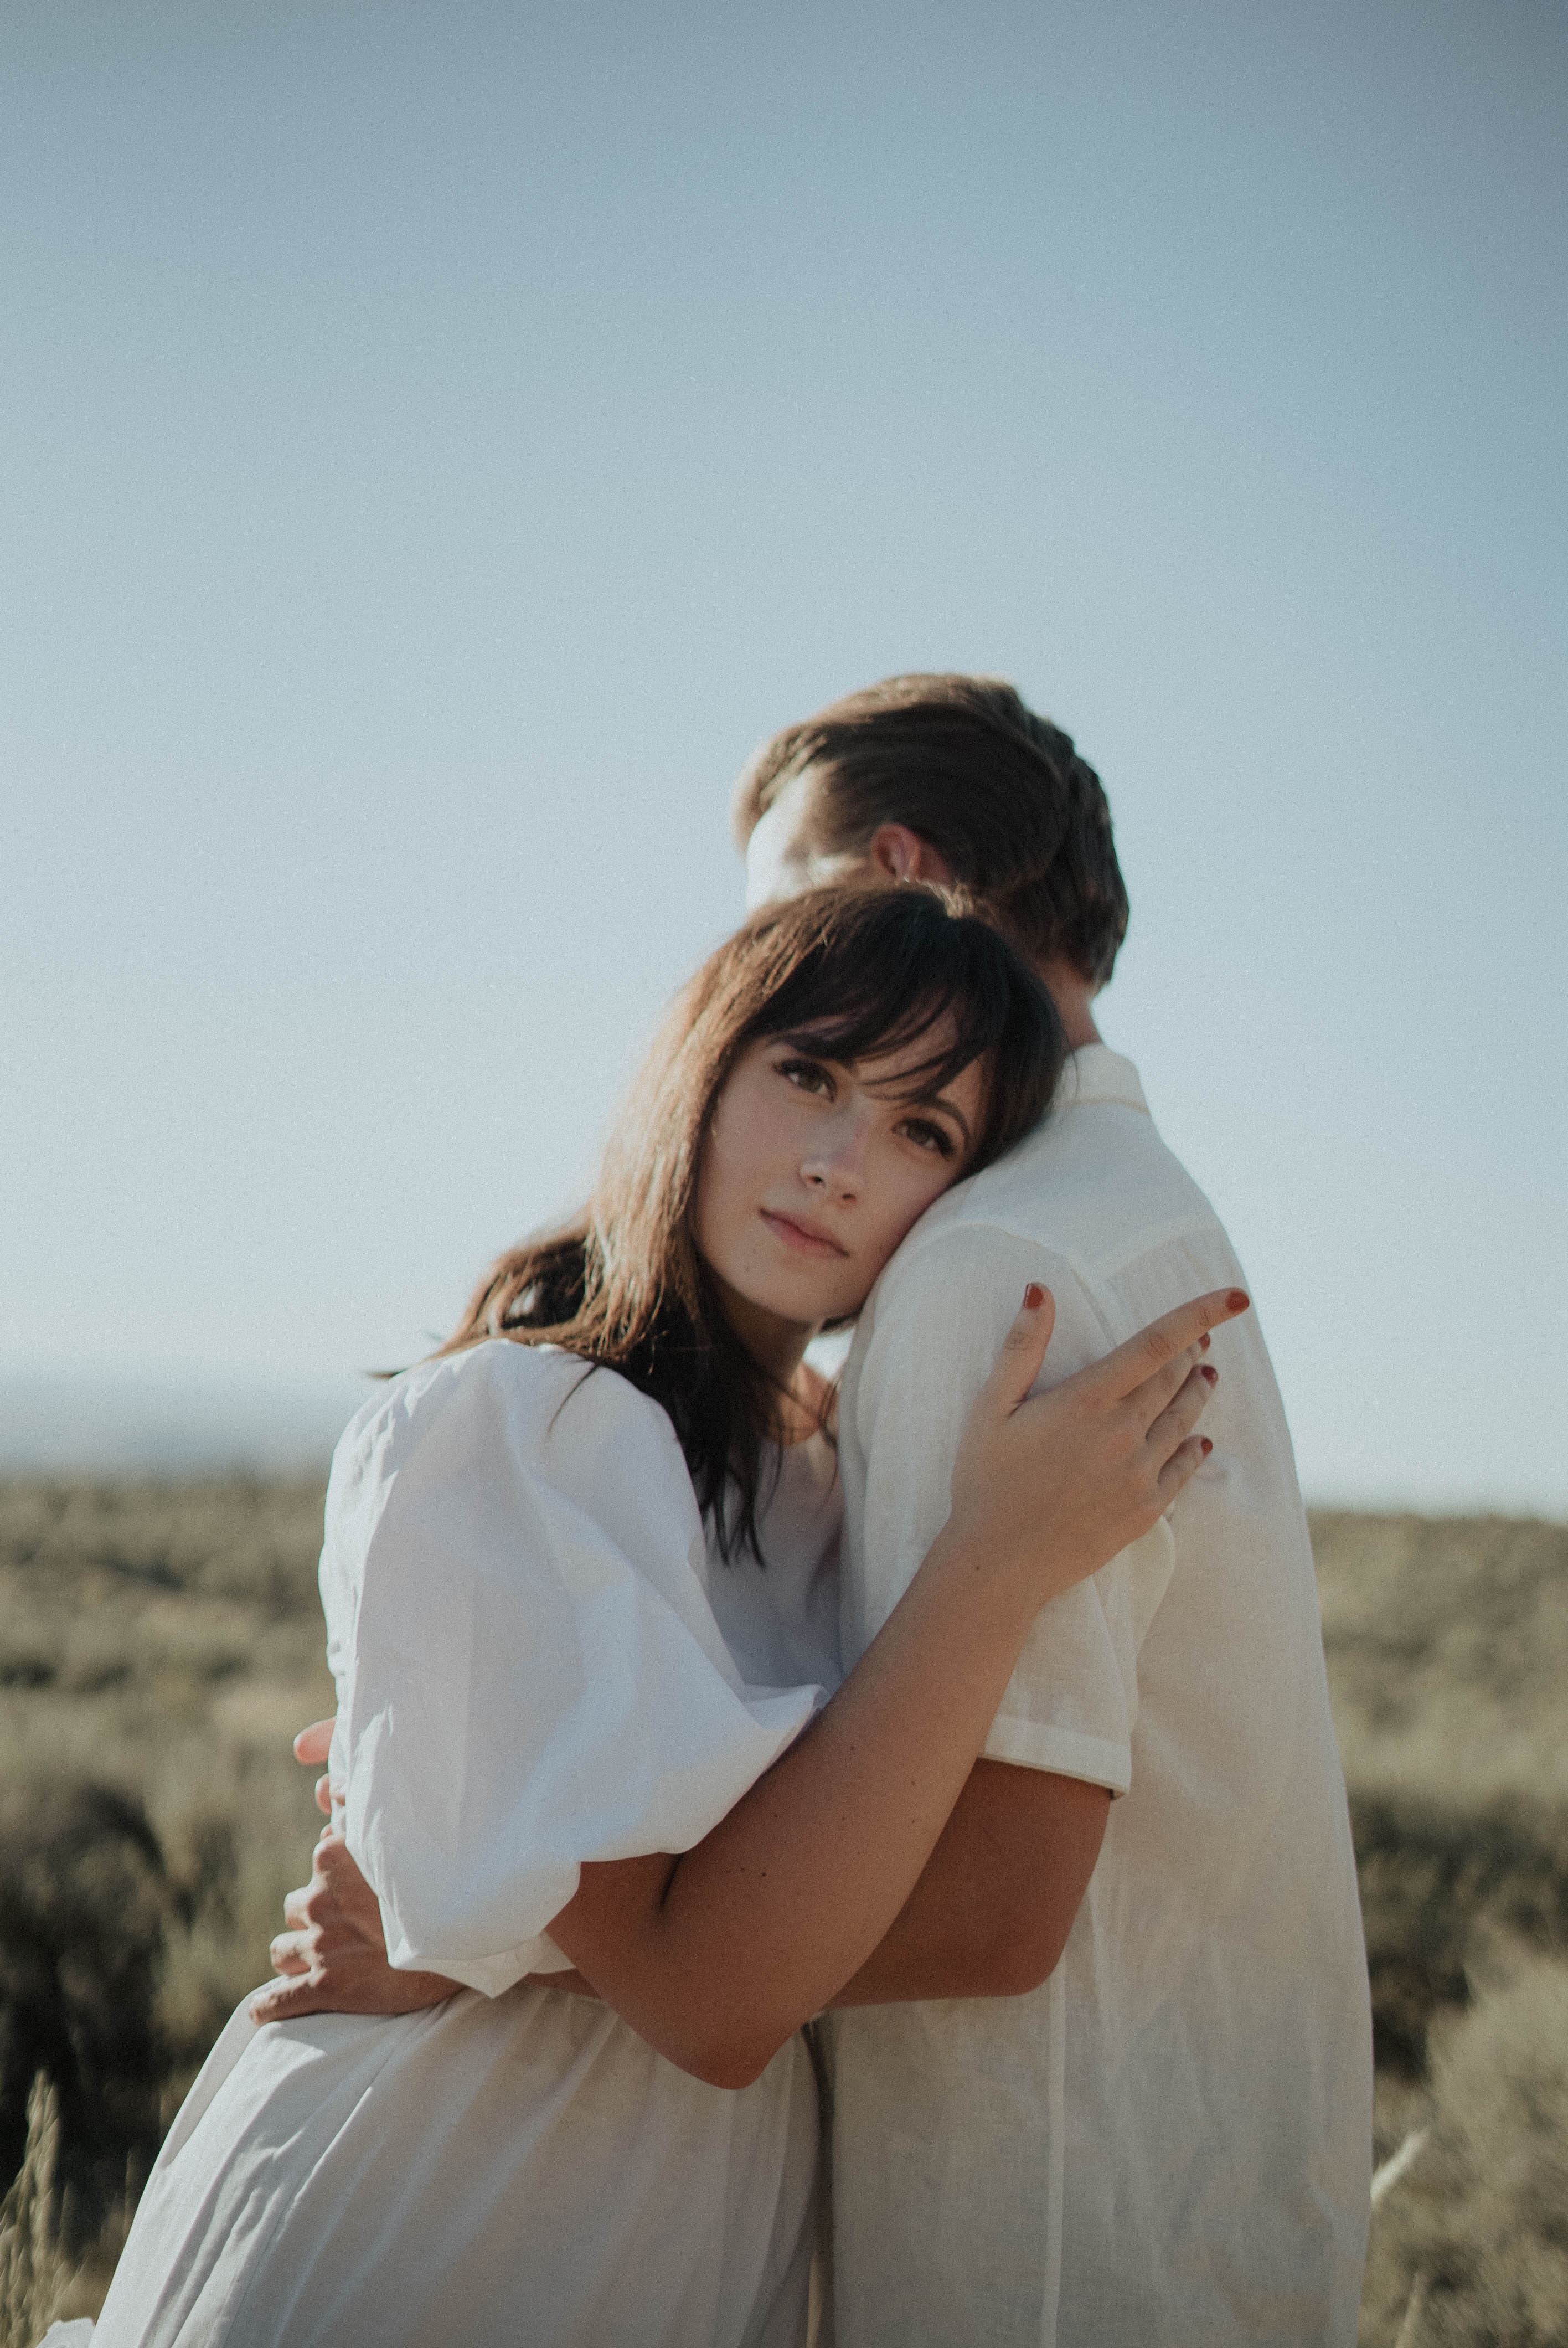 A woman and man hugging. | Source: Pexels